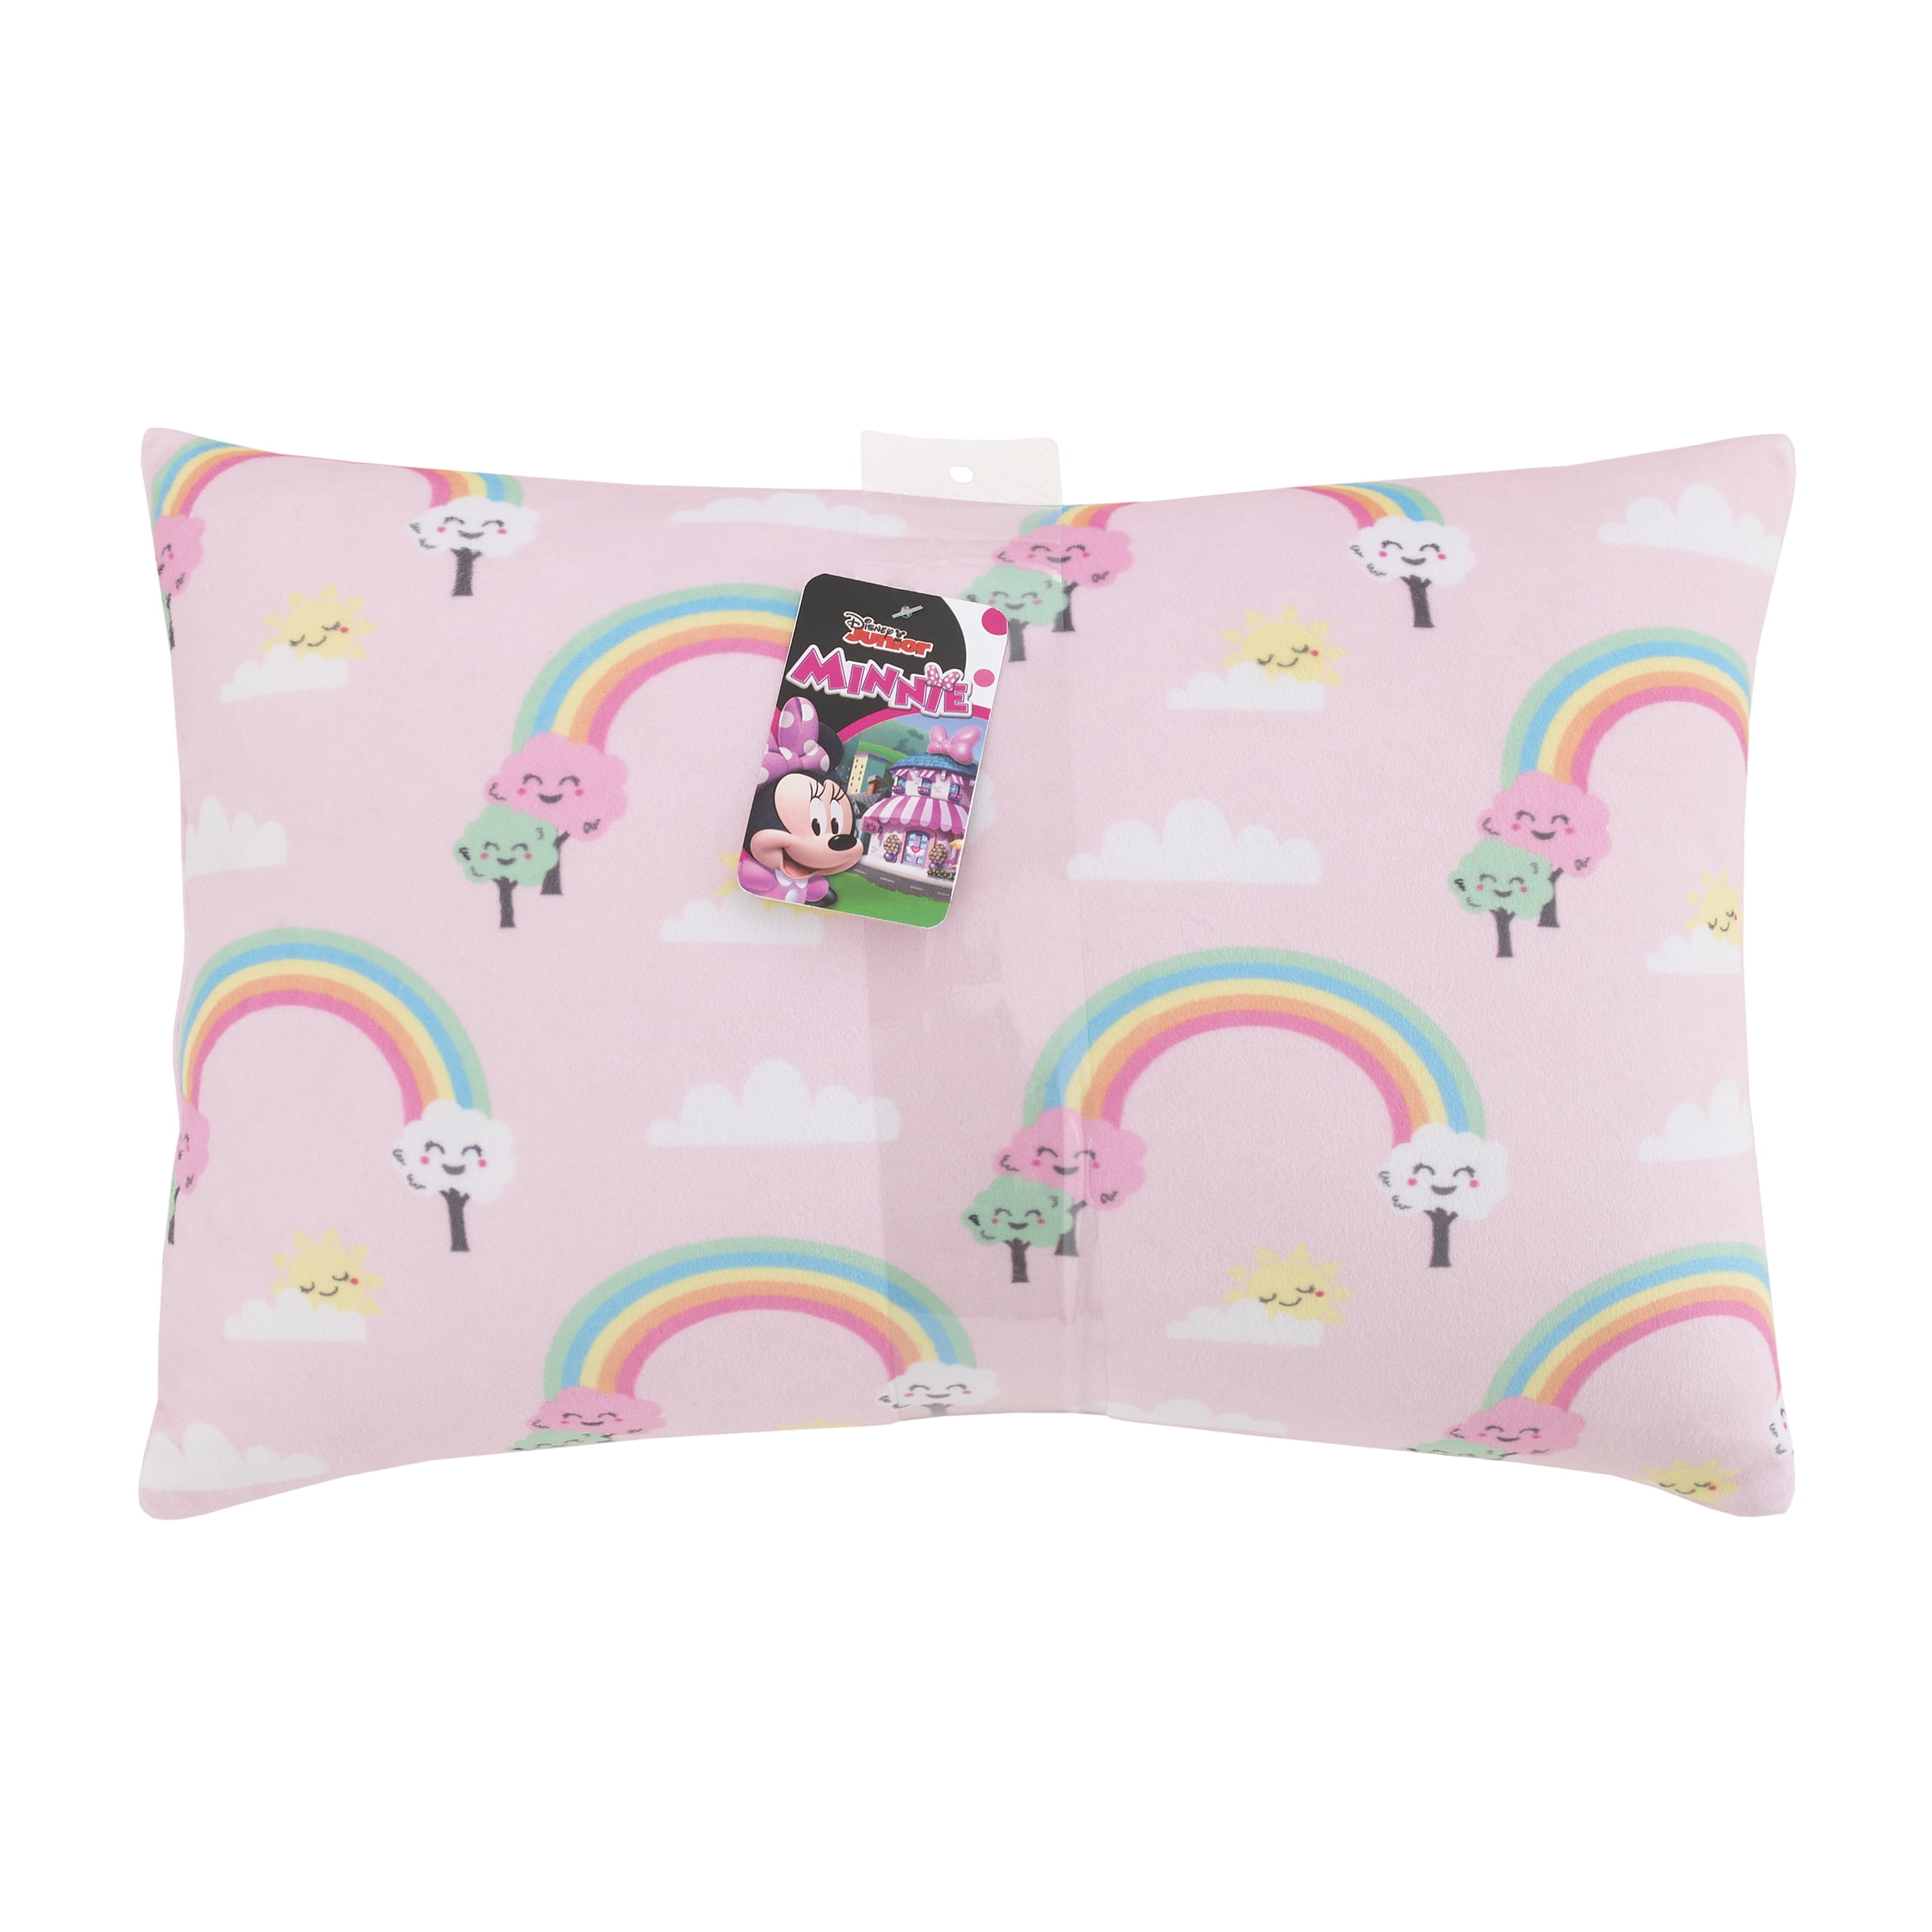 New With Tags 20" x 10" Rainbow Throw Pillow Super Soft And Squishy 